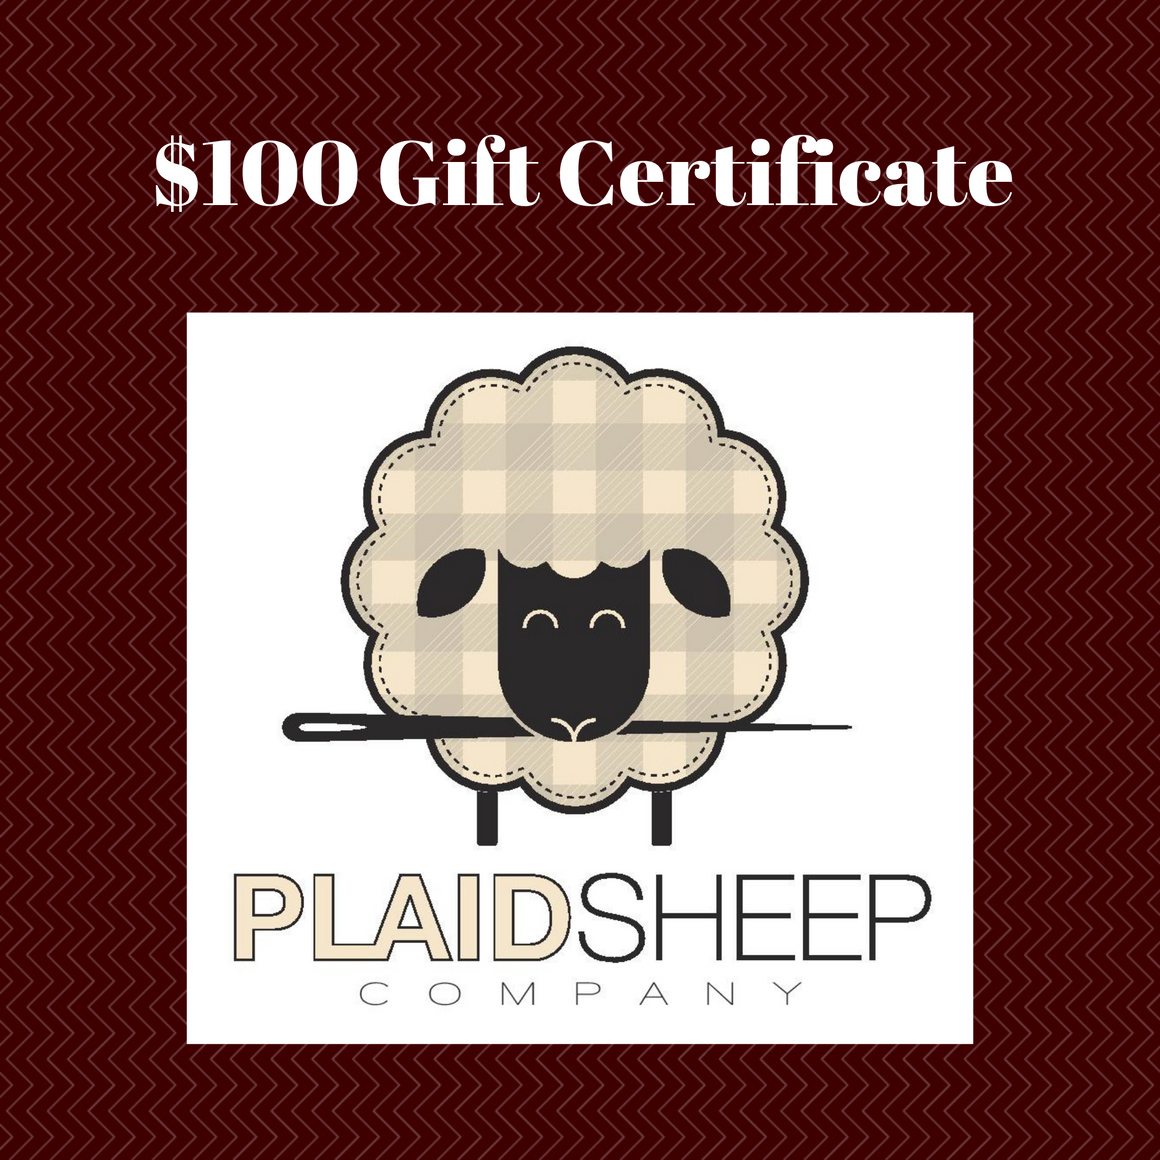 Gift Certificates: $100